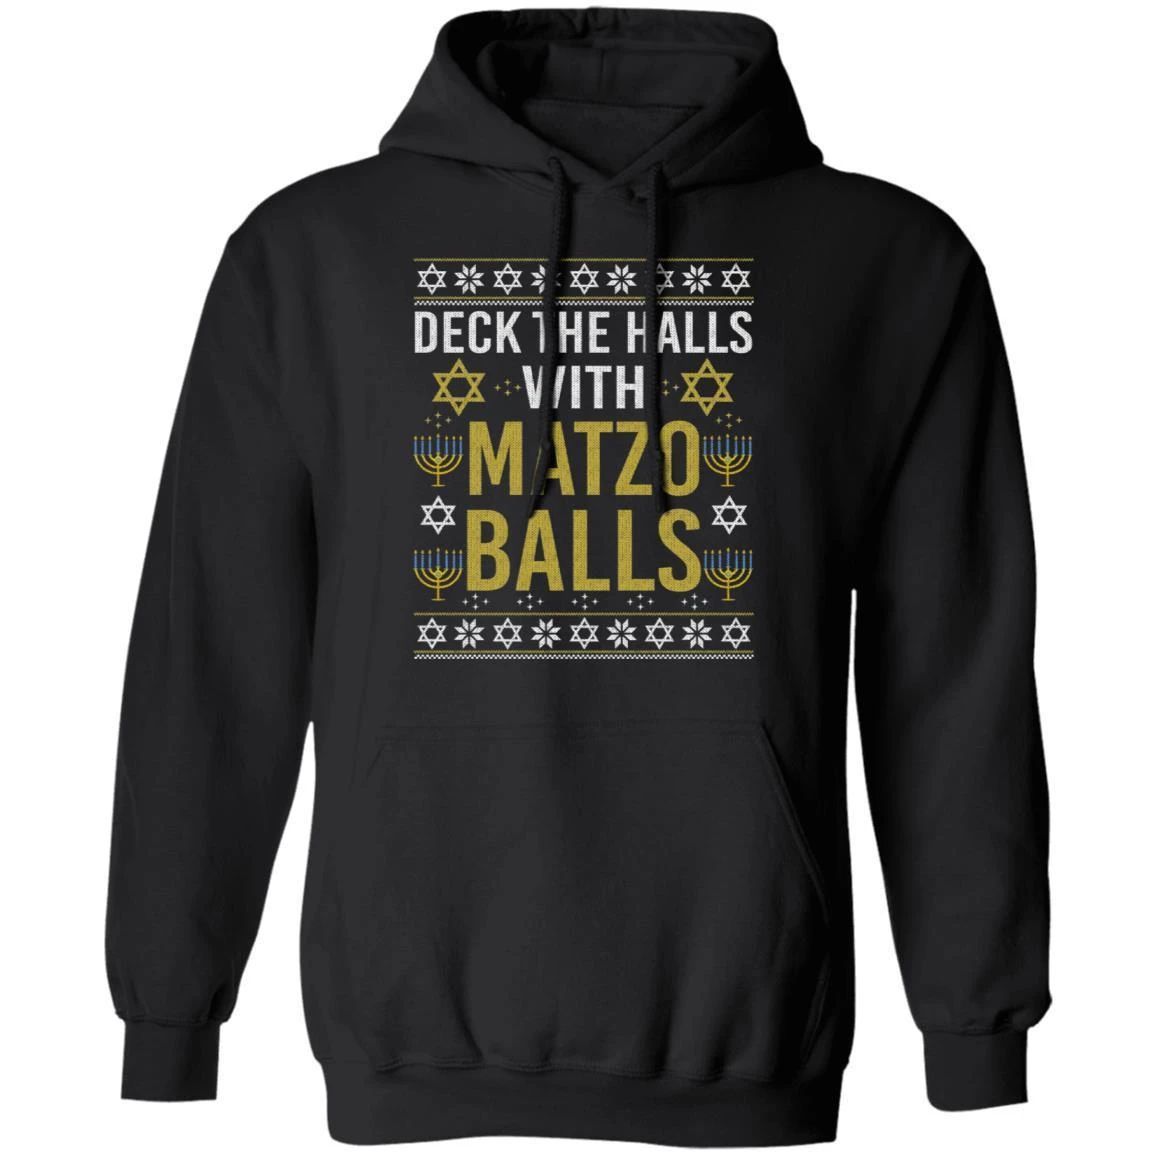 Deck The Halls With Matzo Balls Hanukkah Hoodie Ugly Sweater Style Hoodie